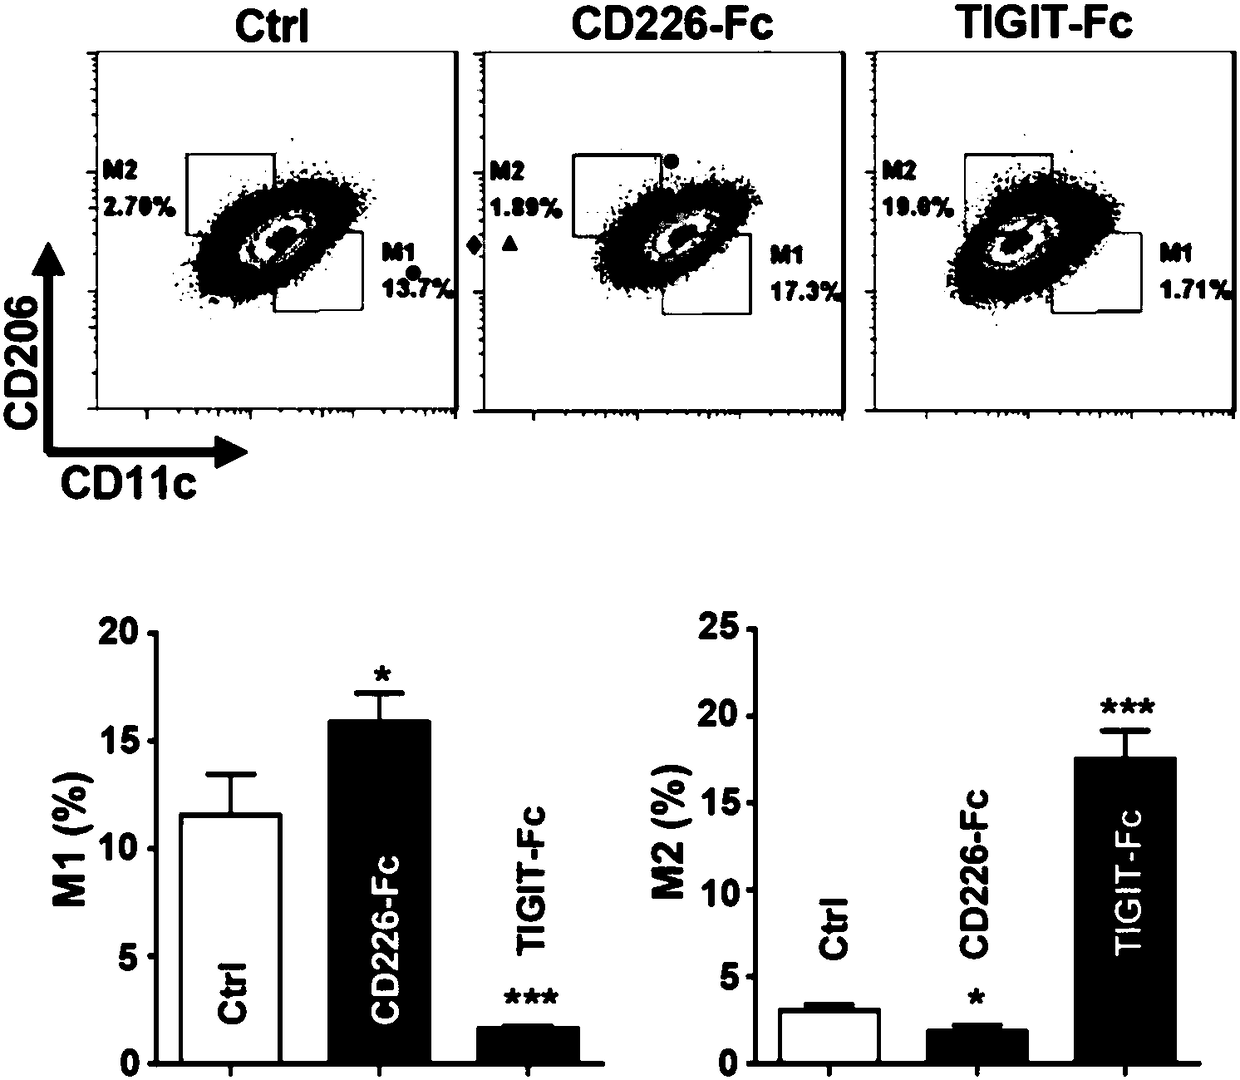 Recombinant fusion protein TIGIT-Fc and application in resisting transplant rejection thereof